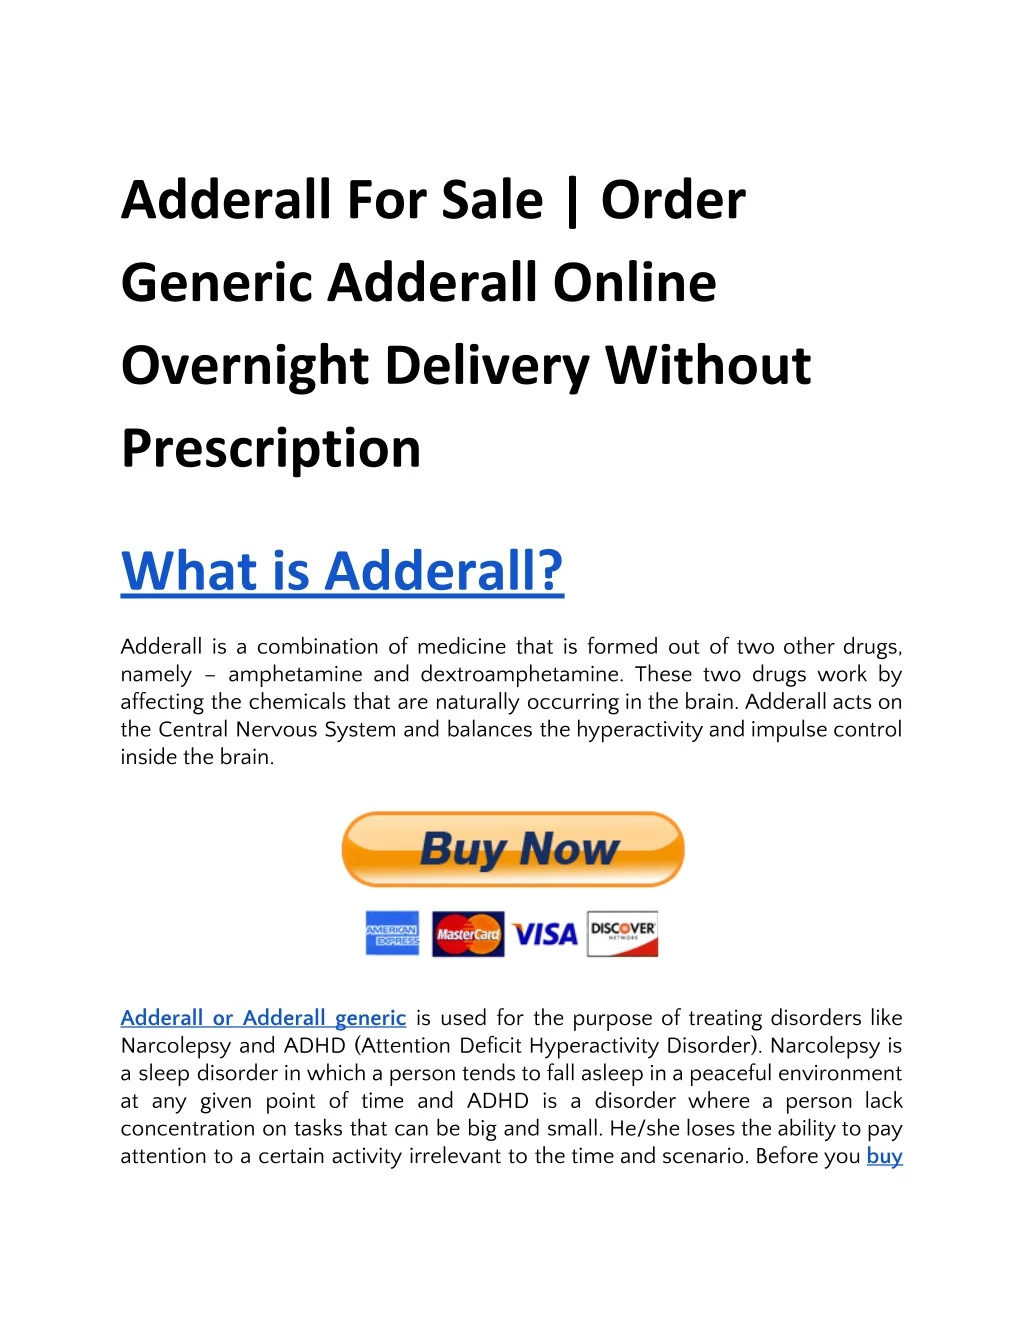 adderall for sale order generic adderall online